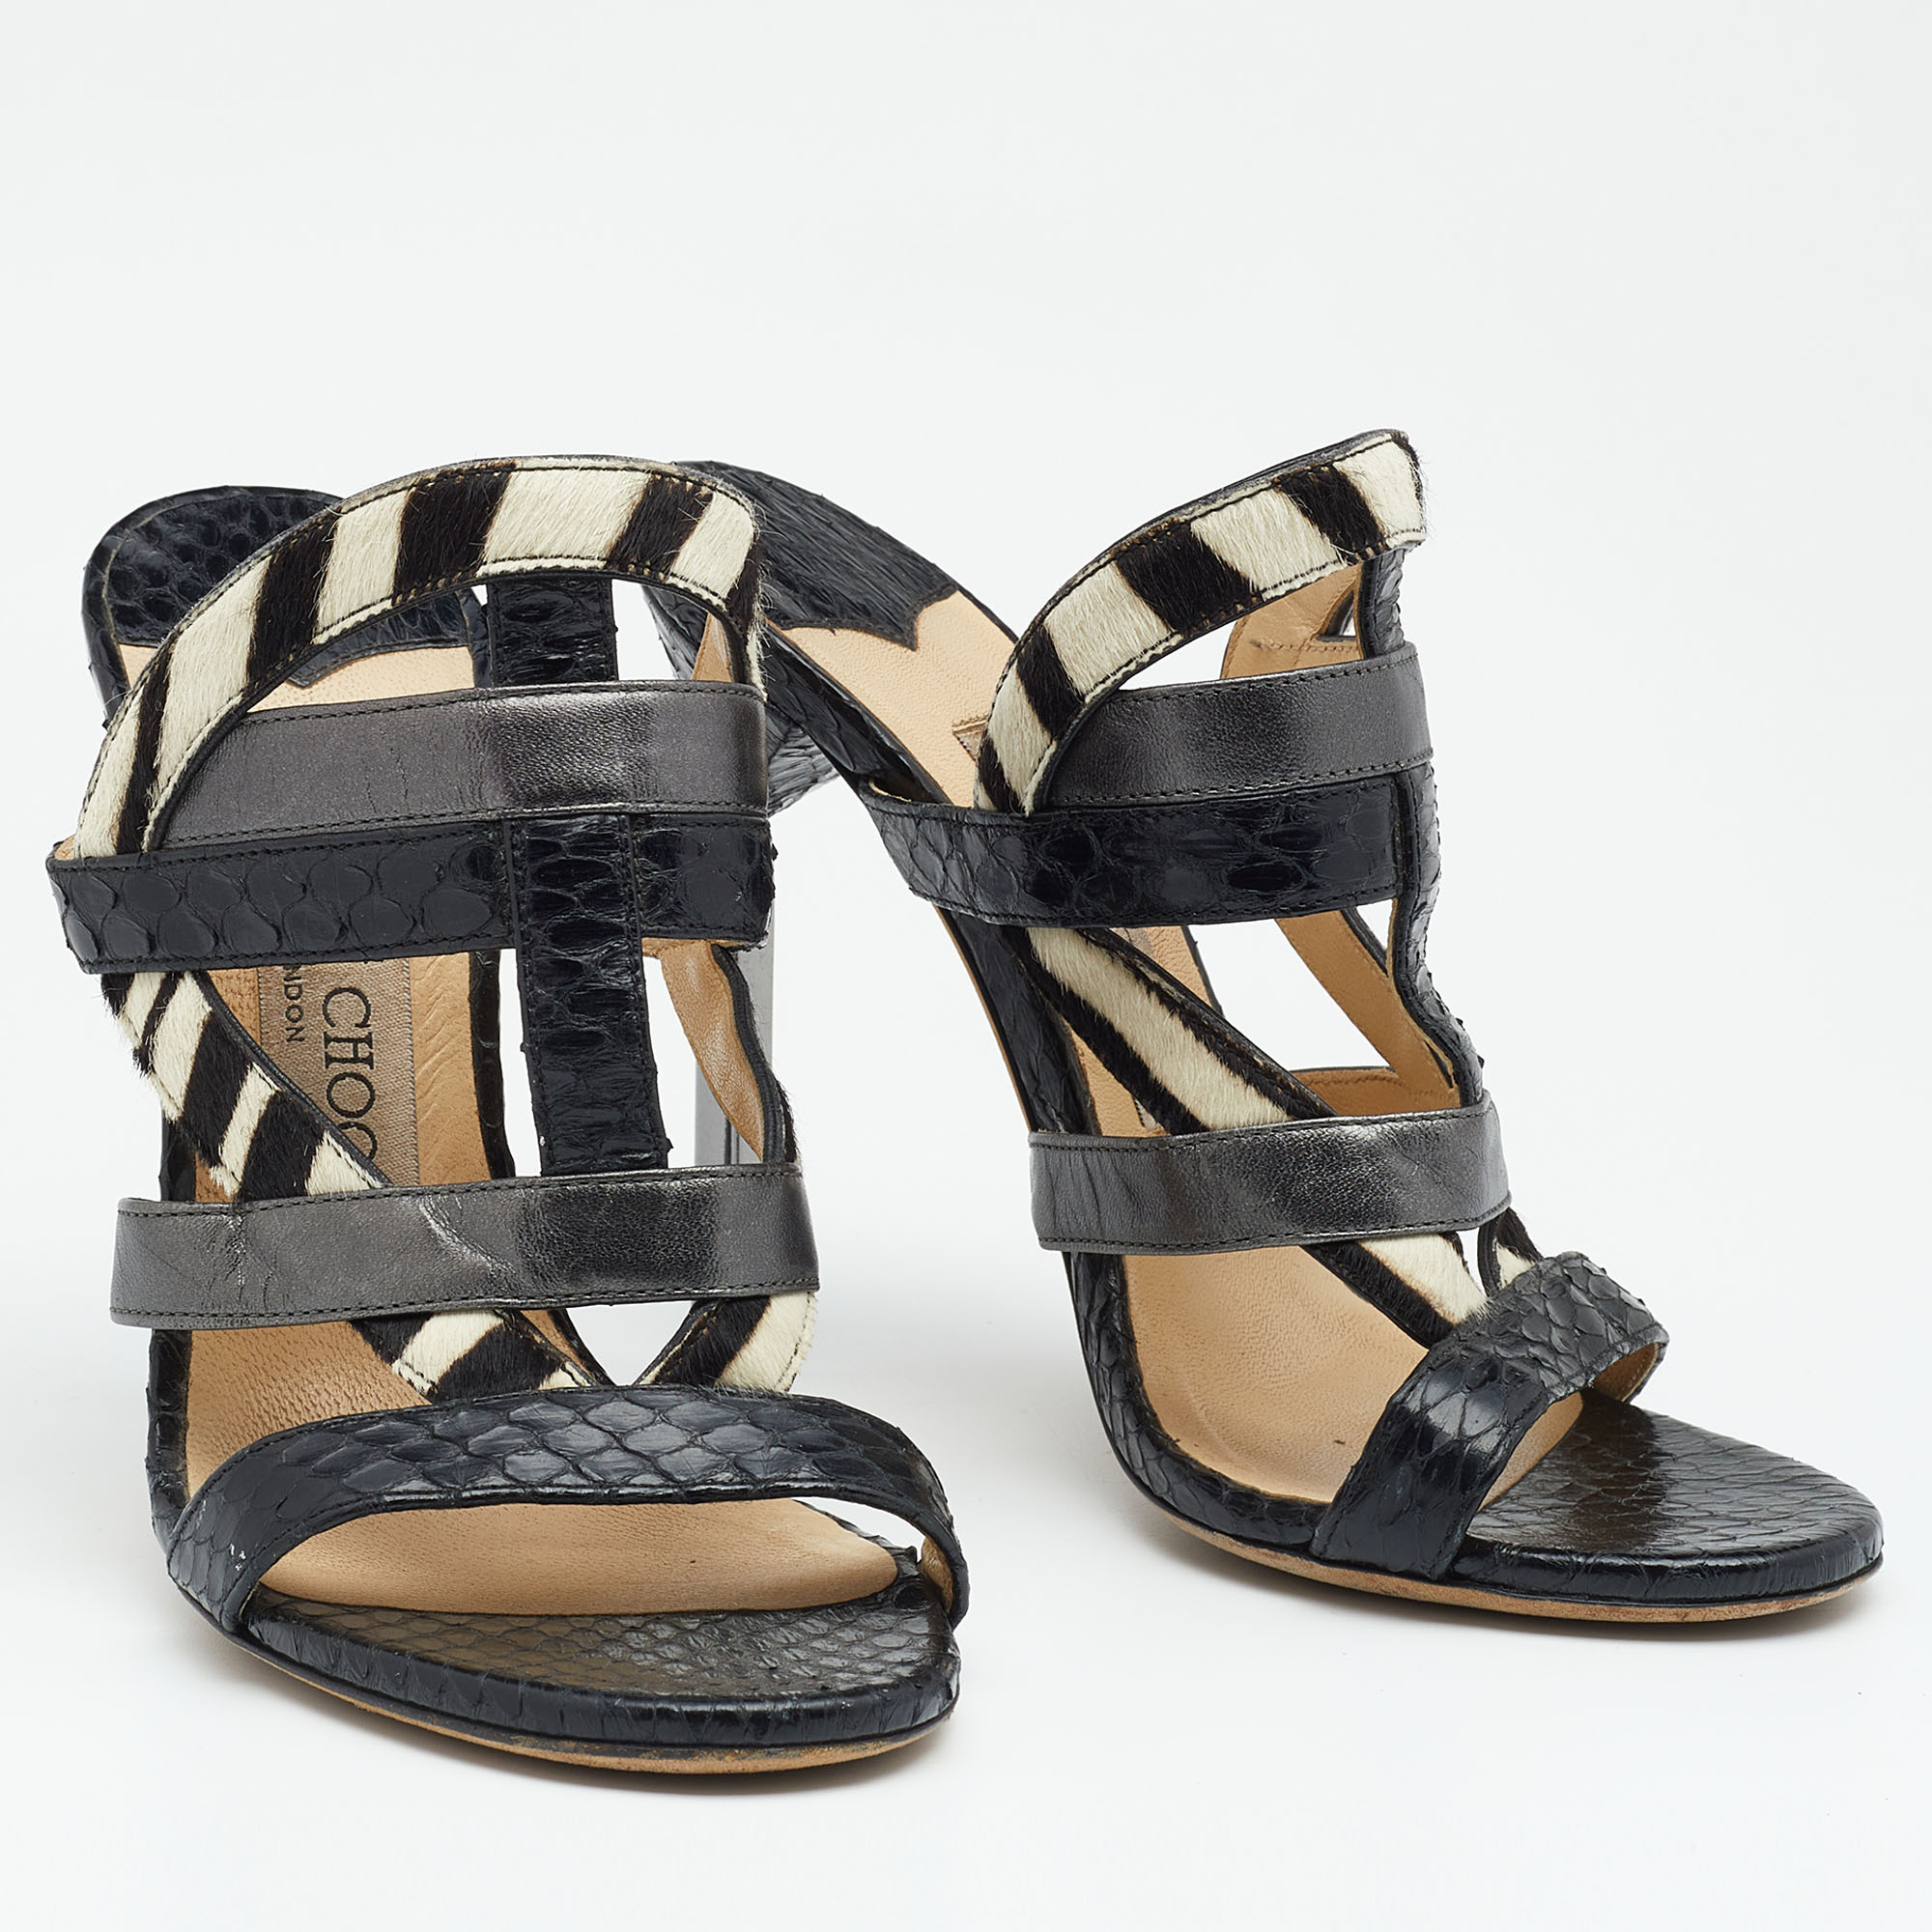 Jimmy Choo Multicolor Python/Calfhair And Leather Sandals Size 35.5